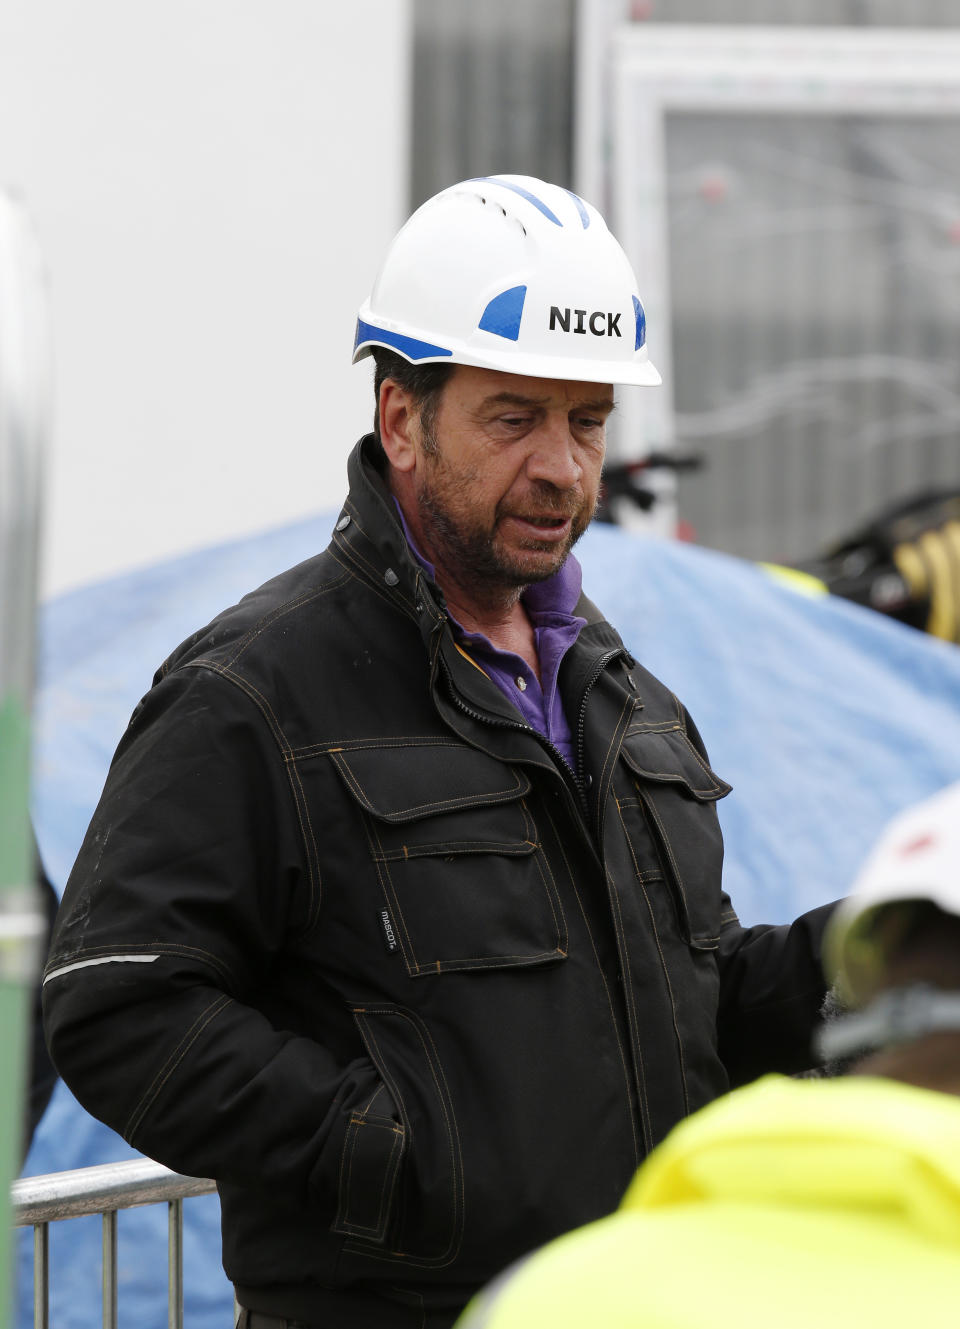 BBC presenter Nick Knowles during a DIY SOS visit to Manchester.